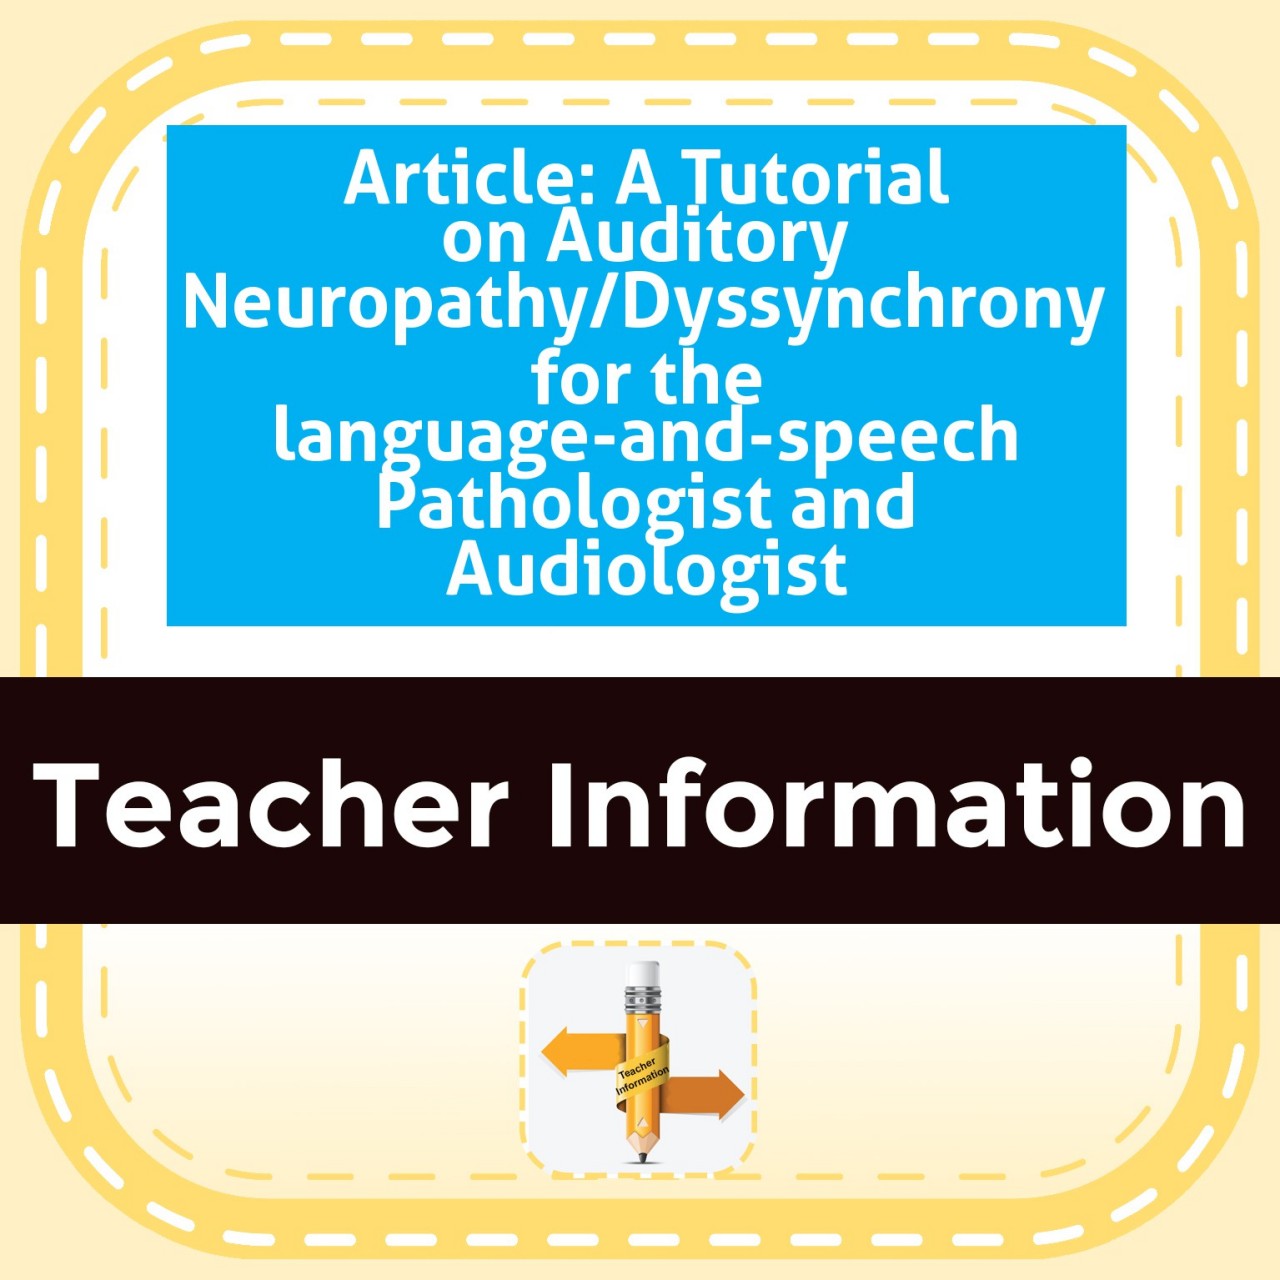 Article: A Tutorial on Auditory Neuropathy/Dyssynchrony for the Speech Language Pathologist and Audiologist